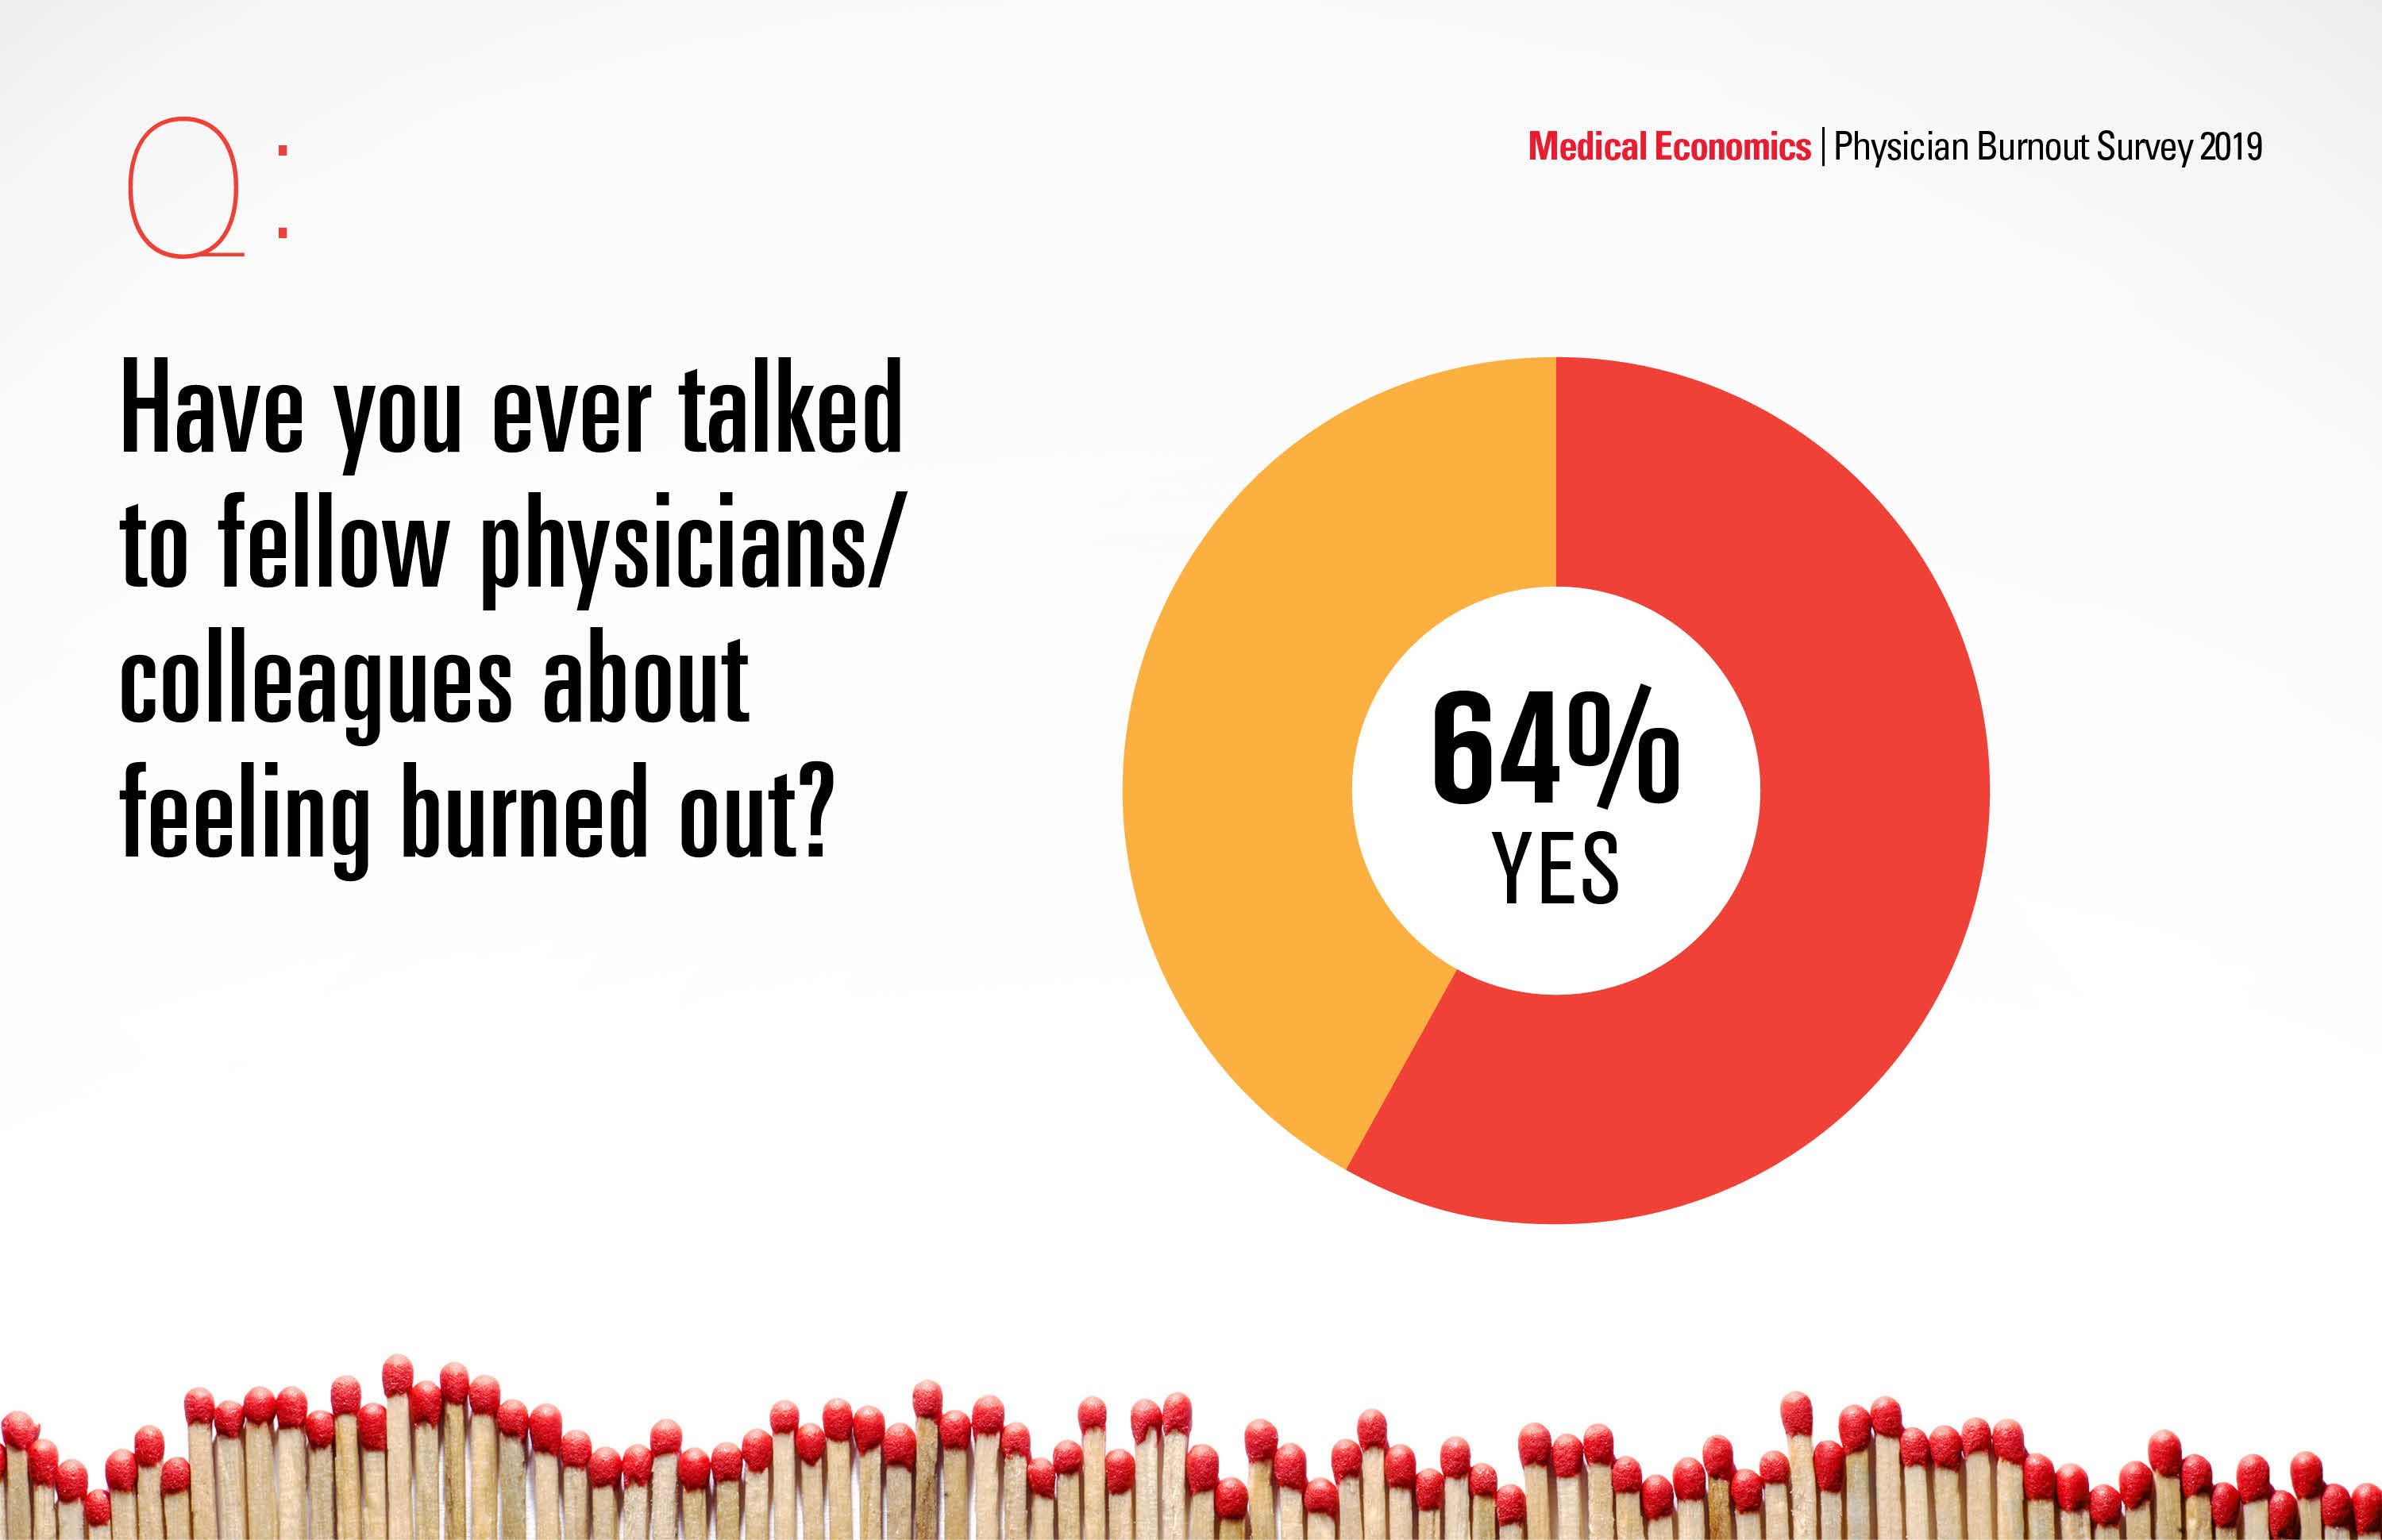 Have you ever talked to fellow physicians/colleagues about feeling burned out?